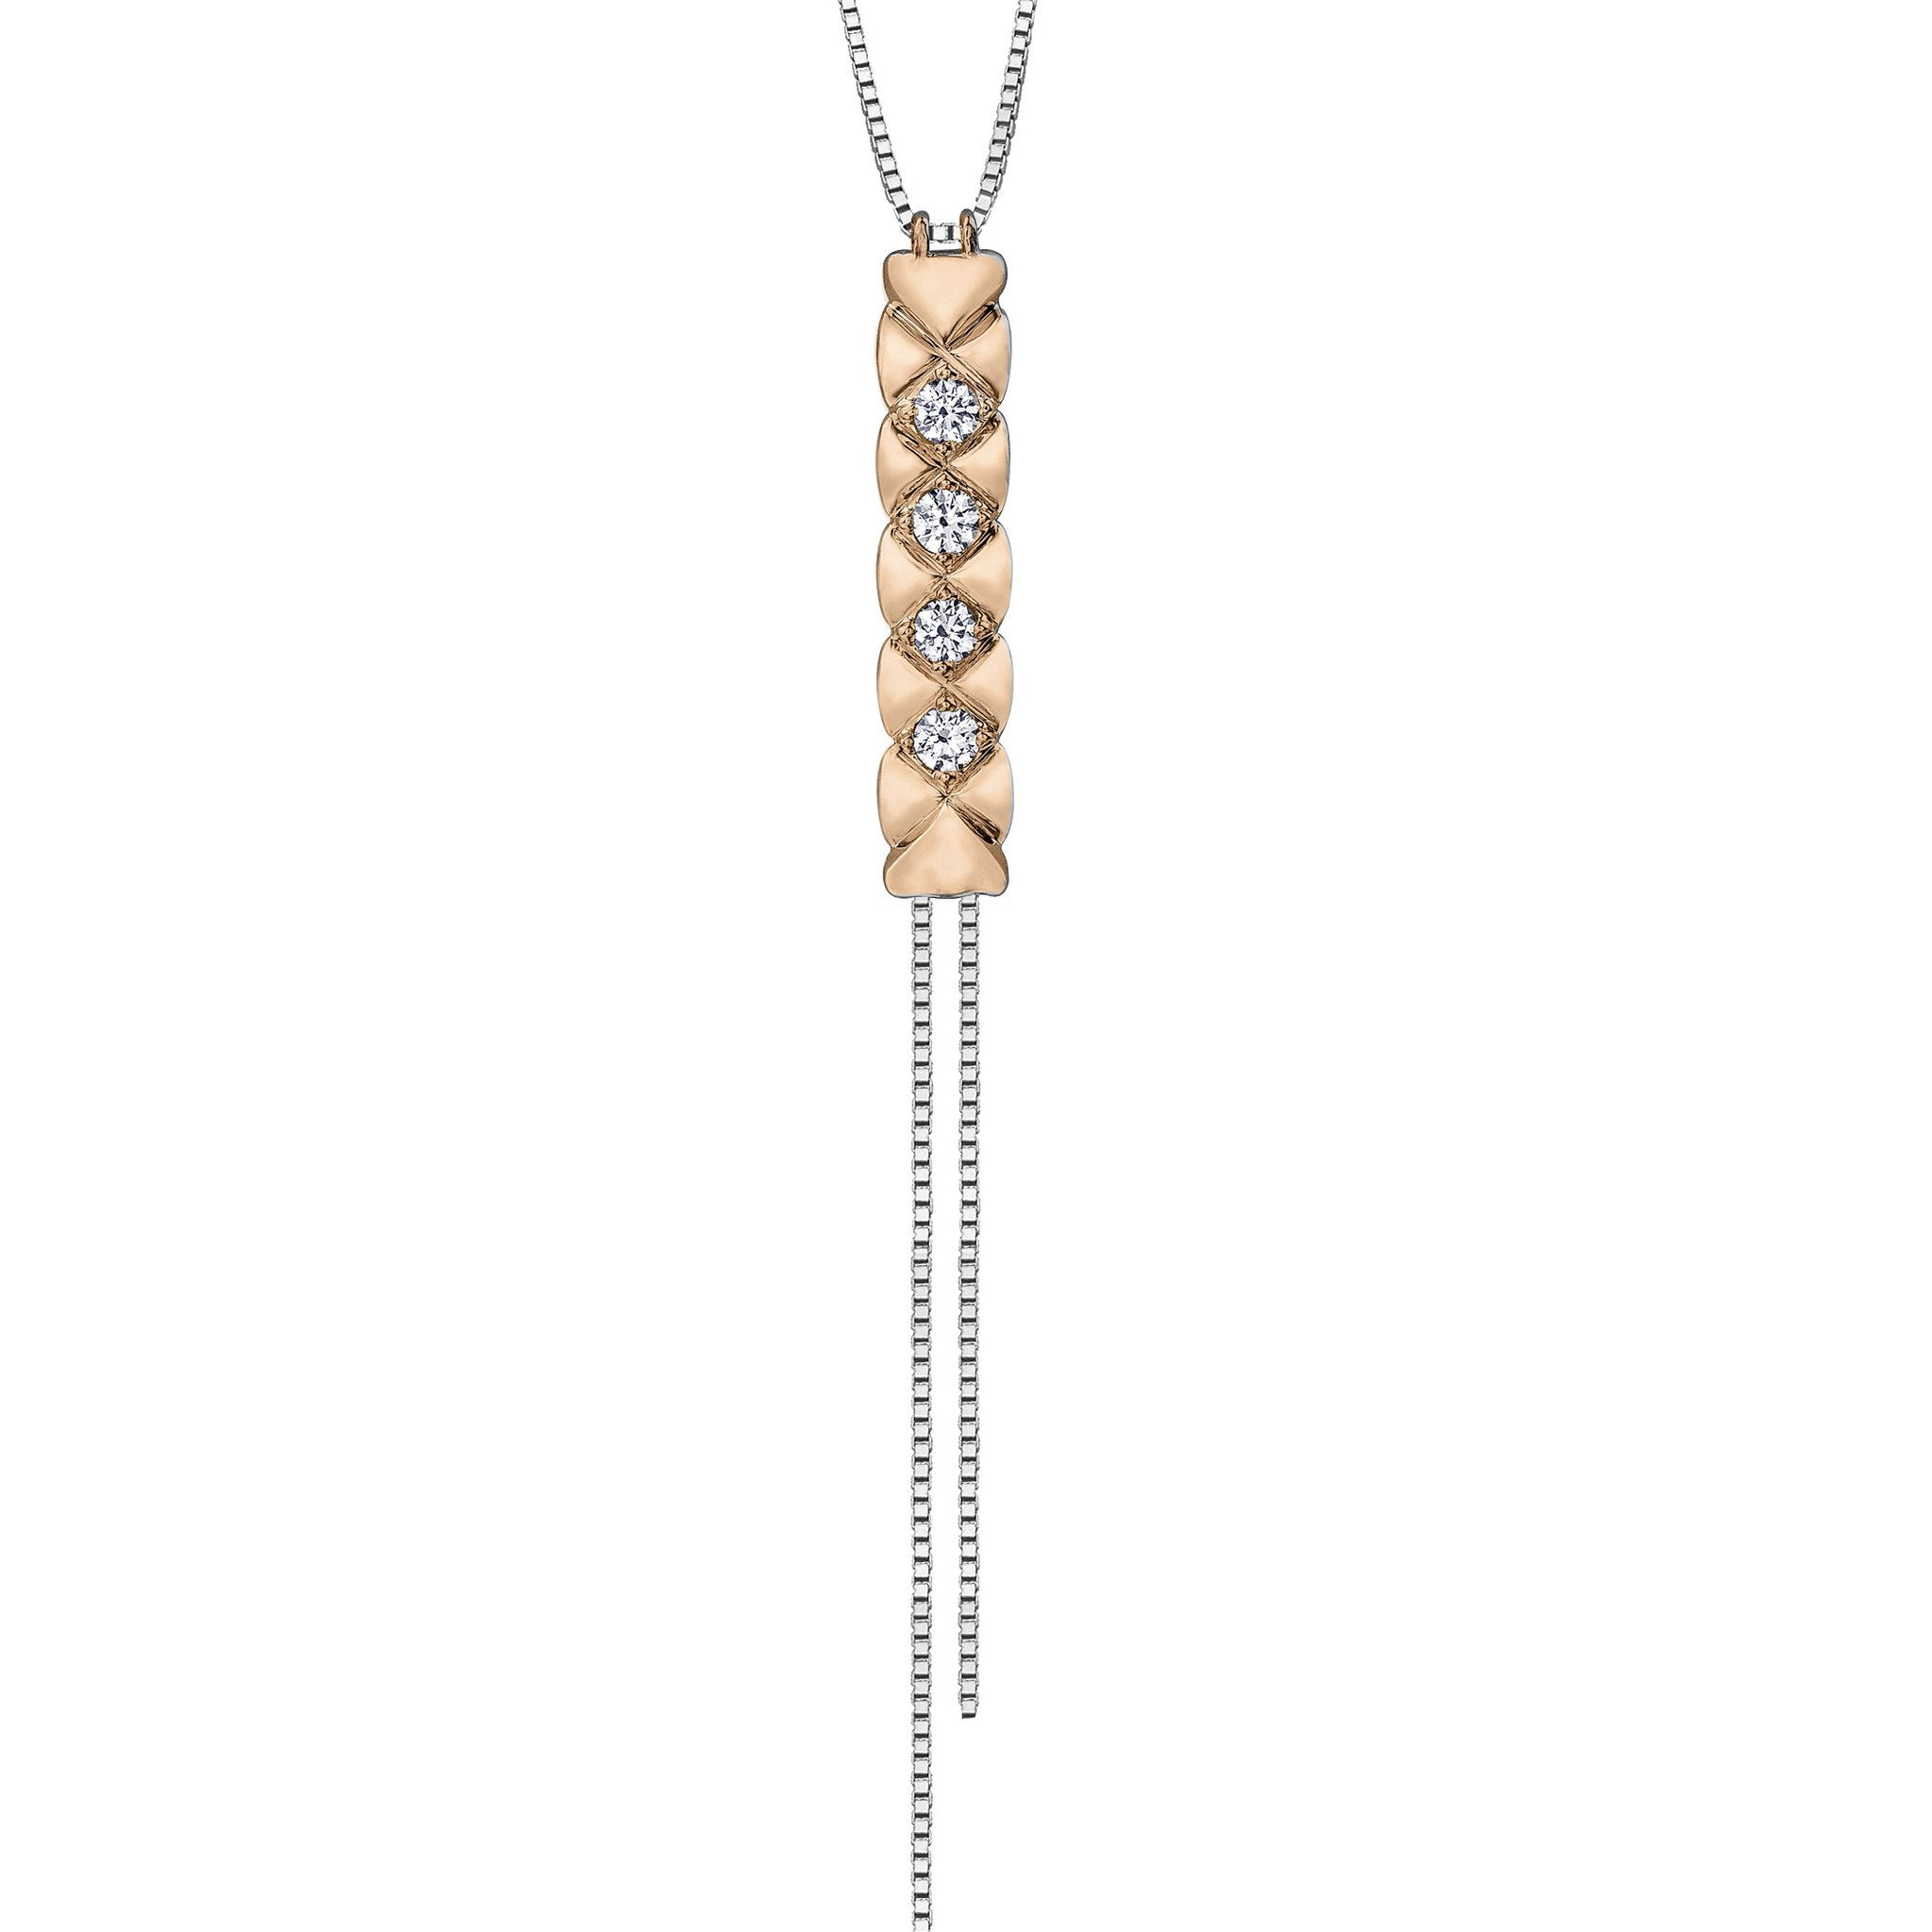 Crafted in 14KT rose Certified Canadian Gold, this bolo style necklace features a quilted pattern set with round brilliant-cut Canadian diamonds. 